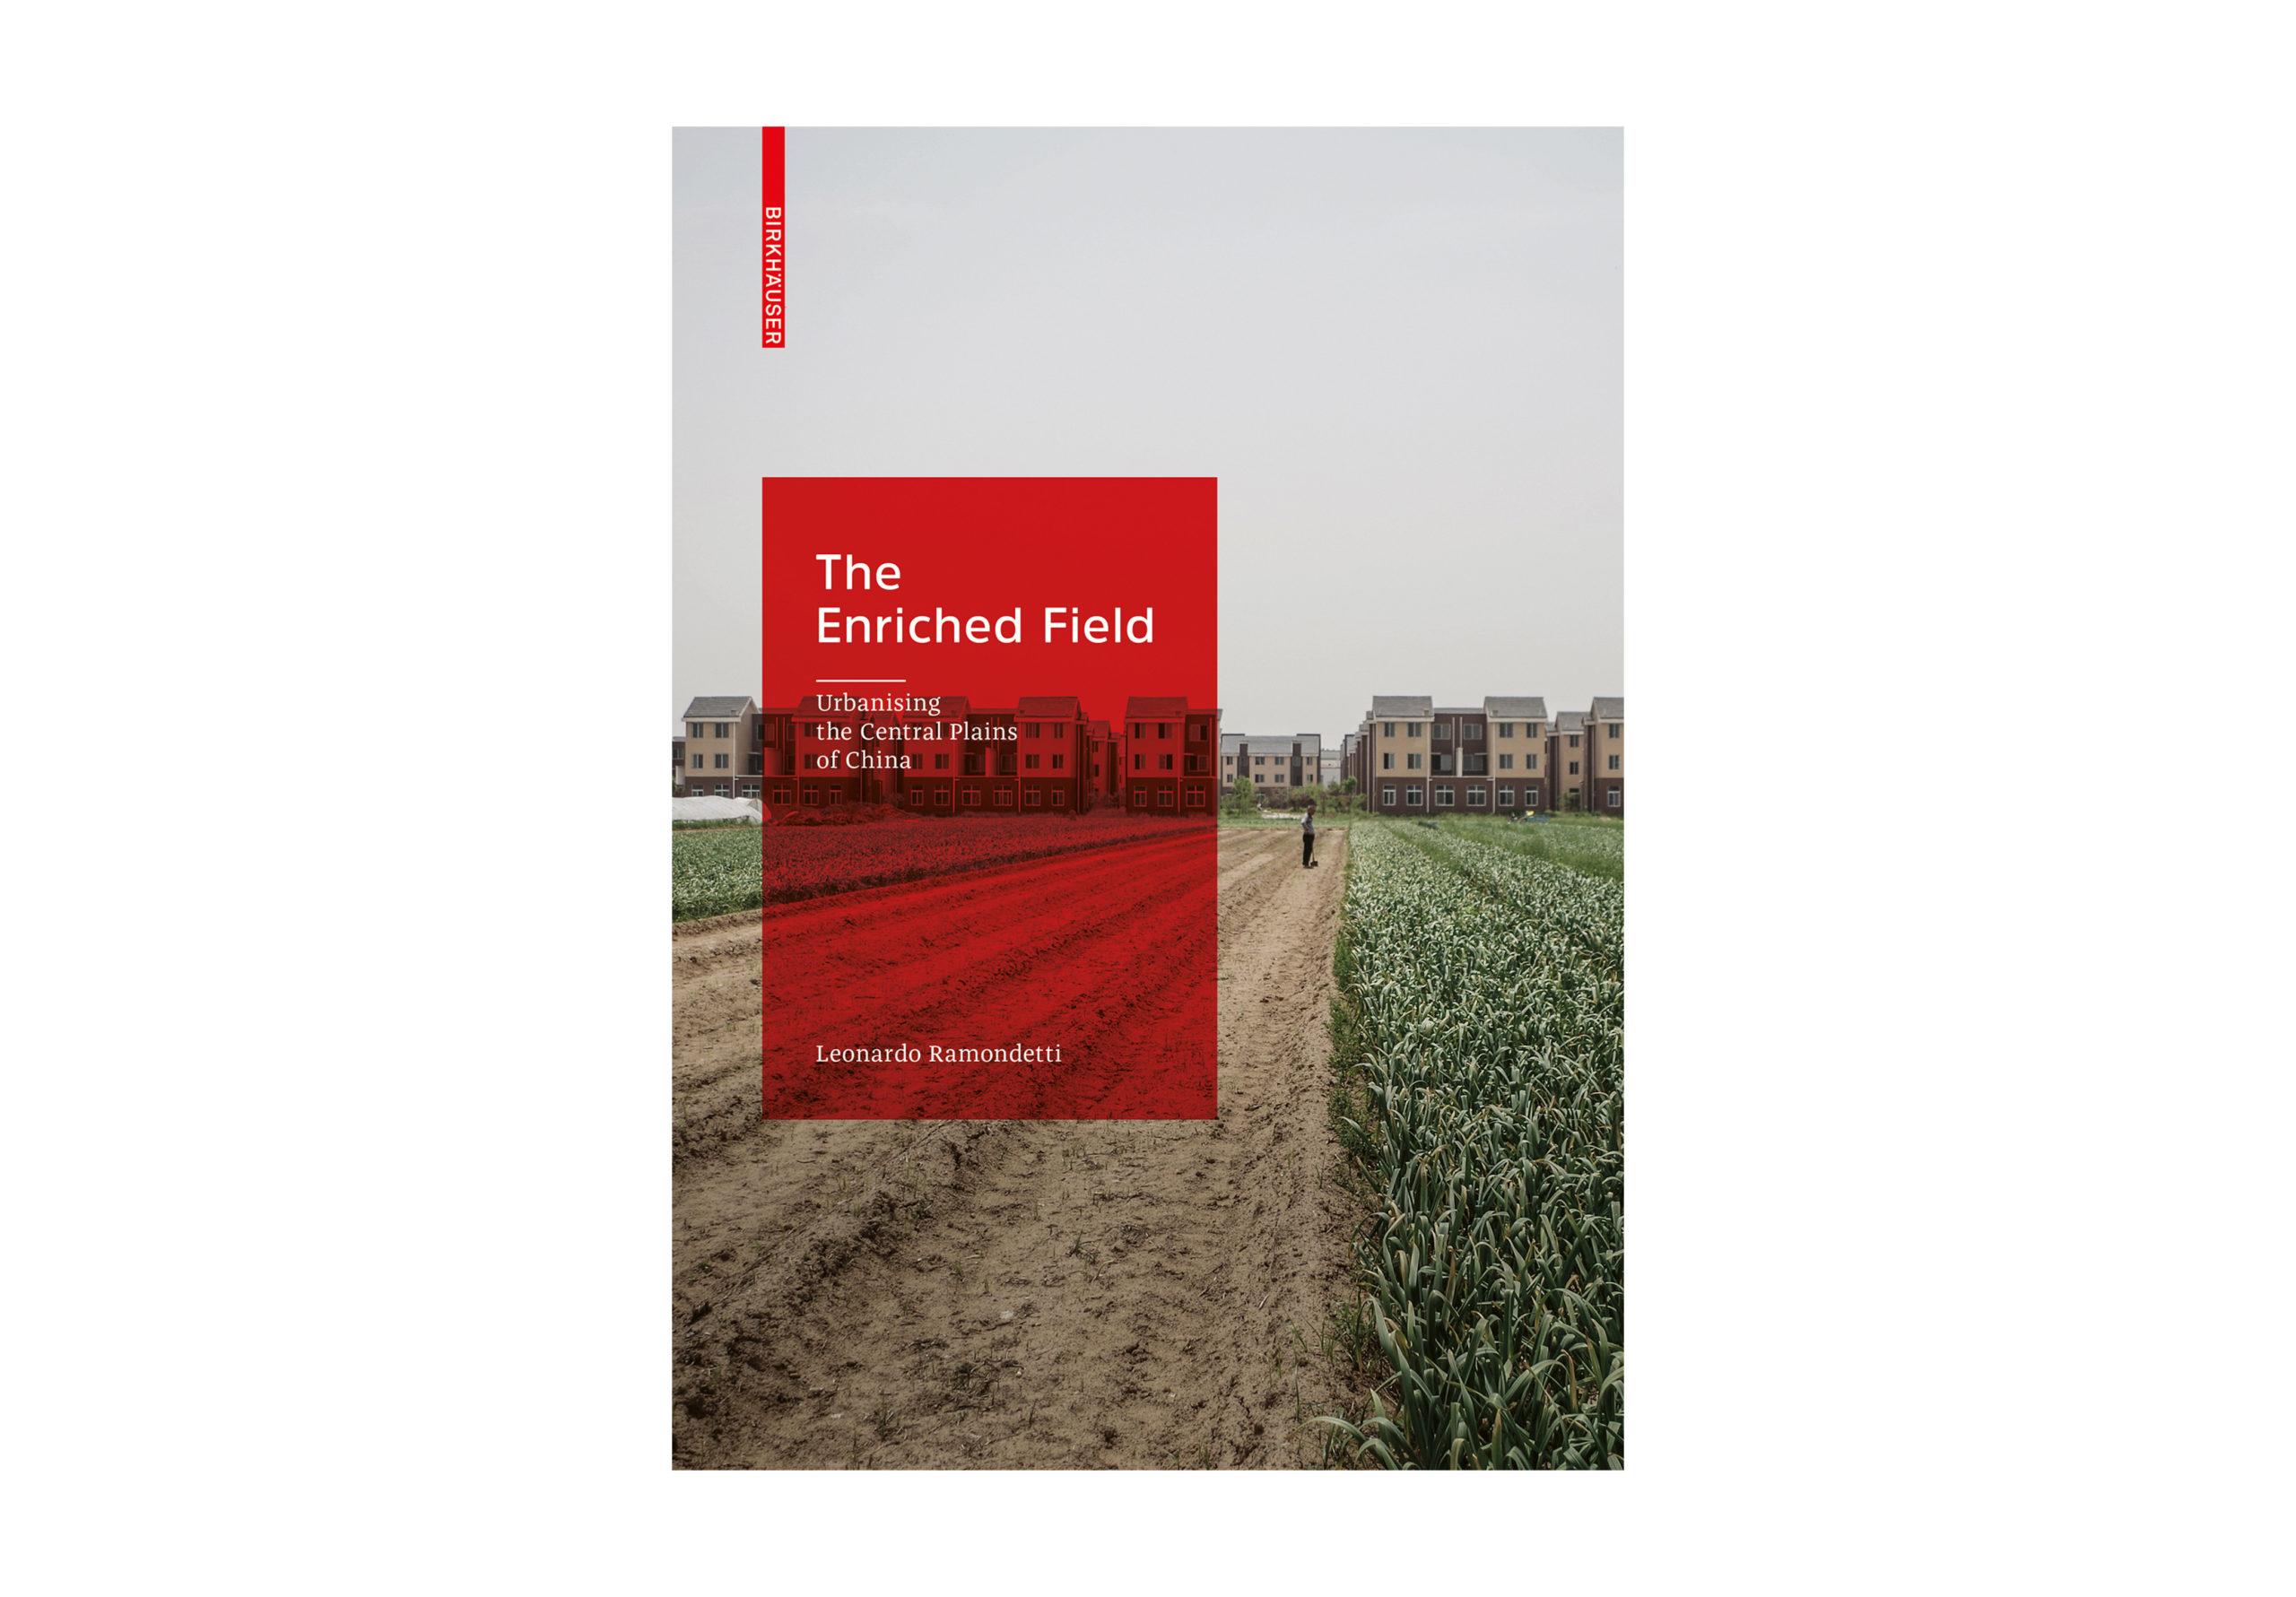 The Enriched Field | Book Presentation